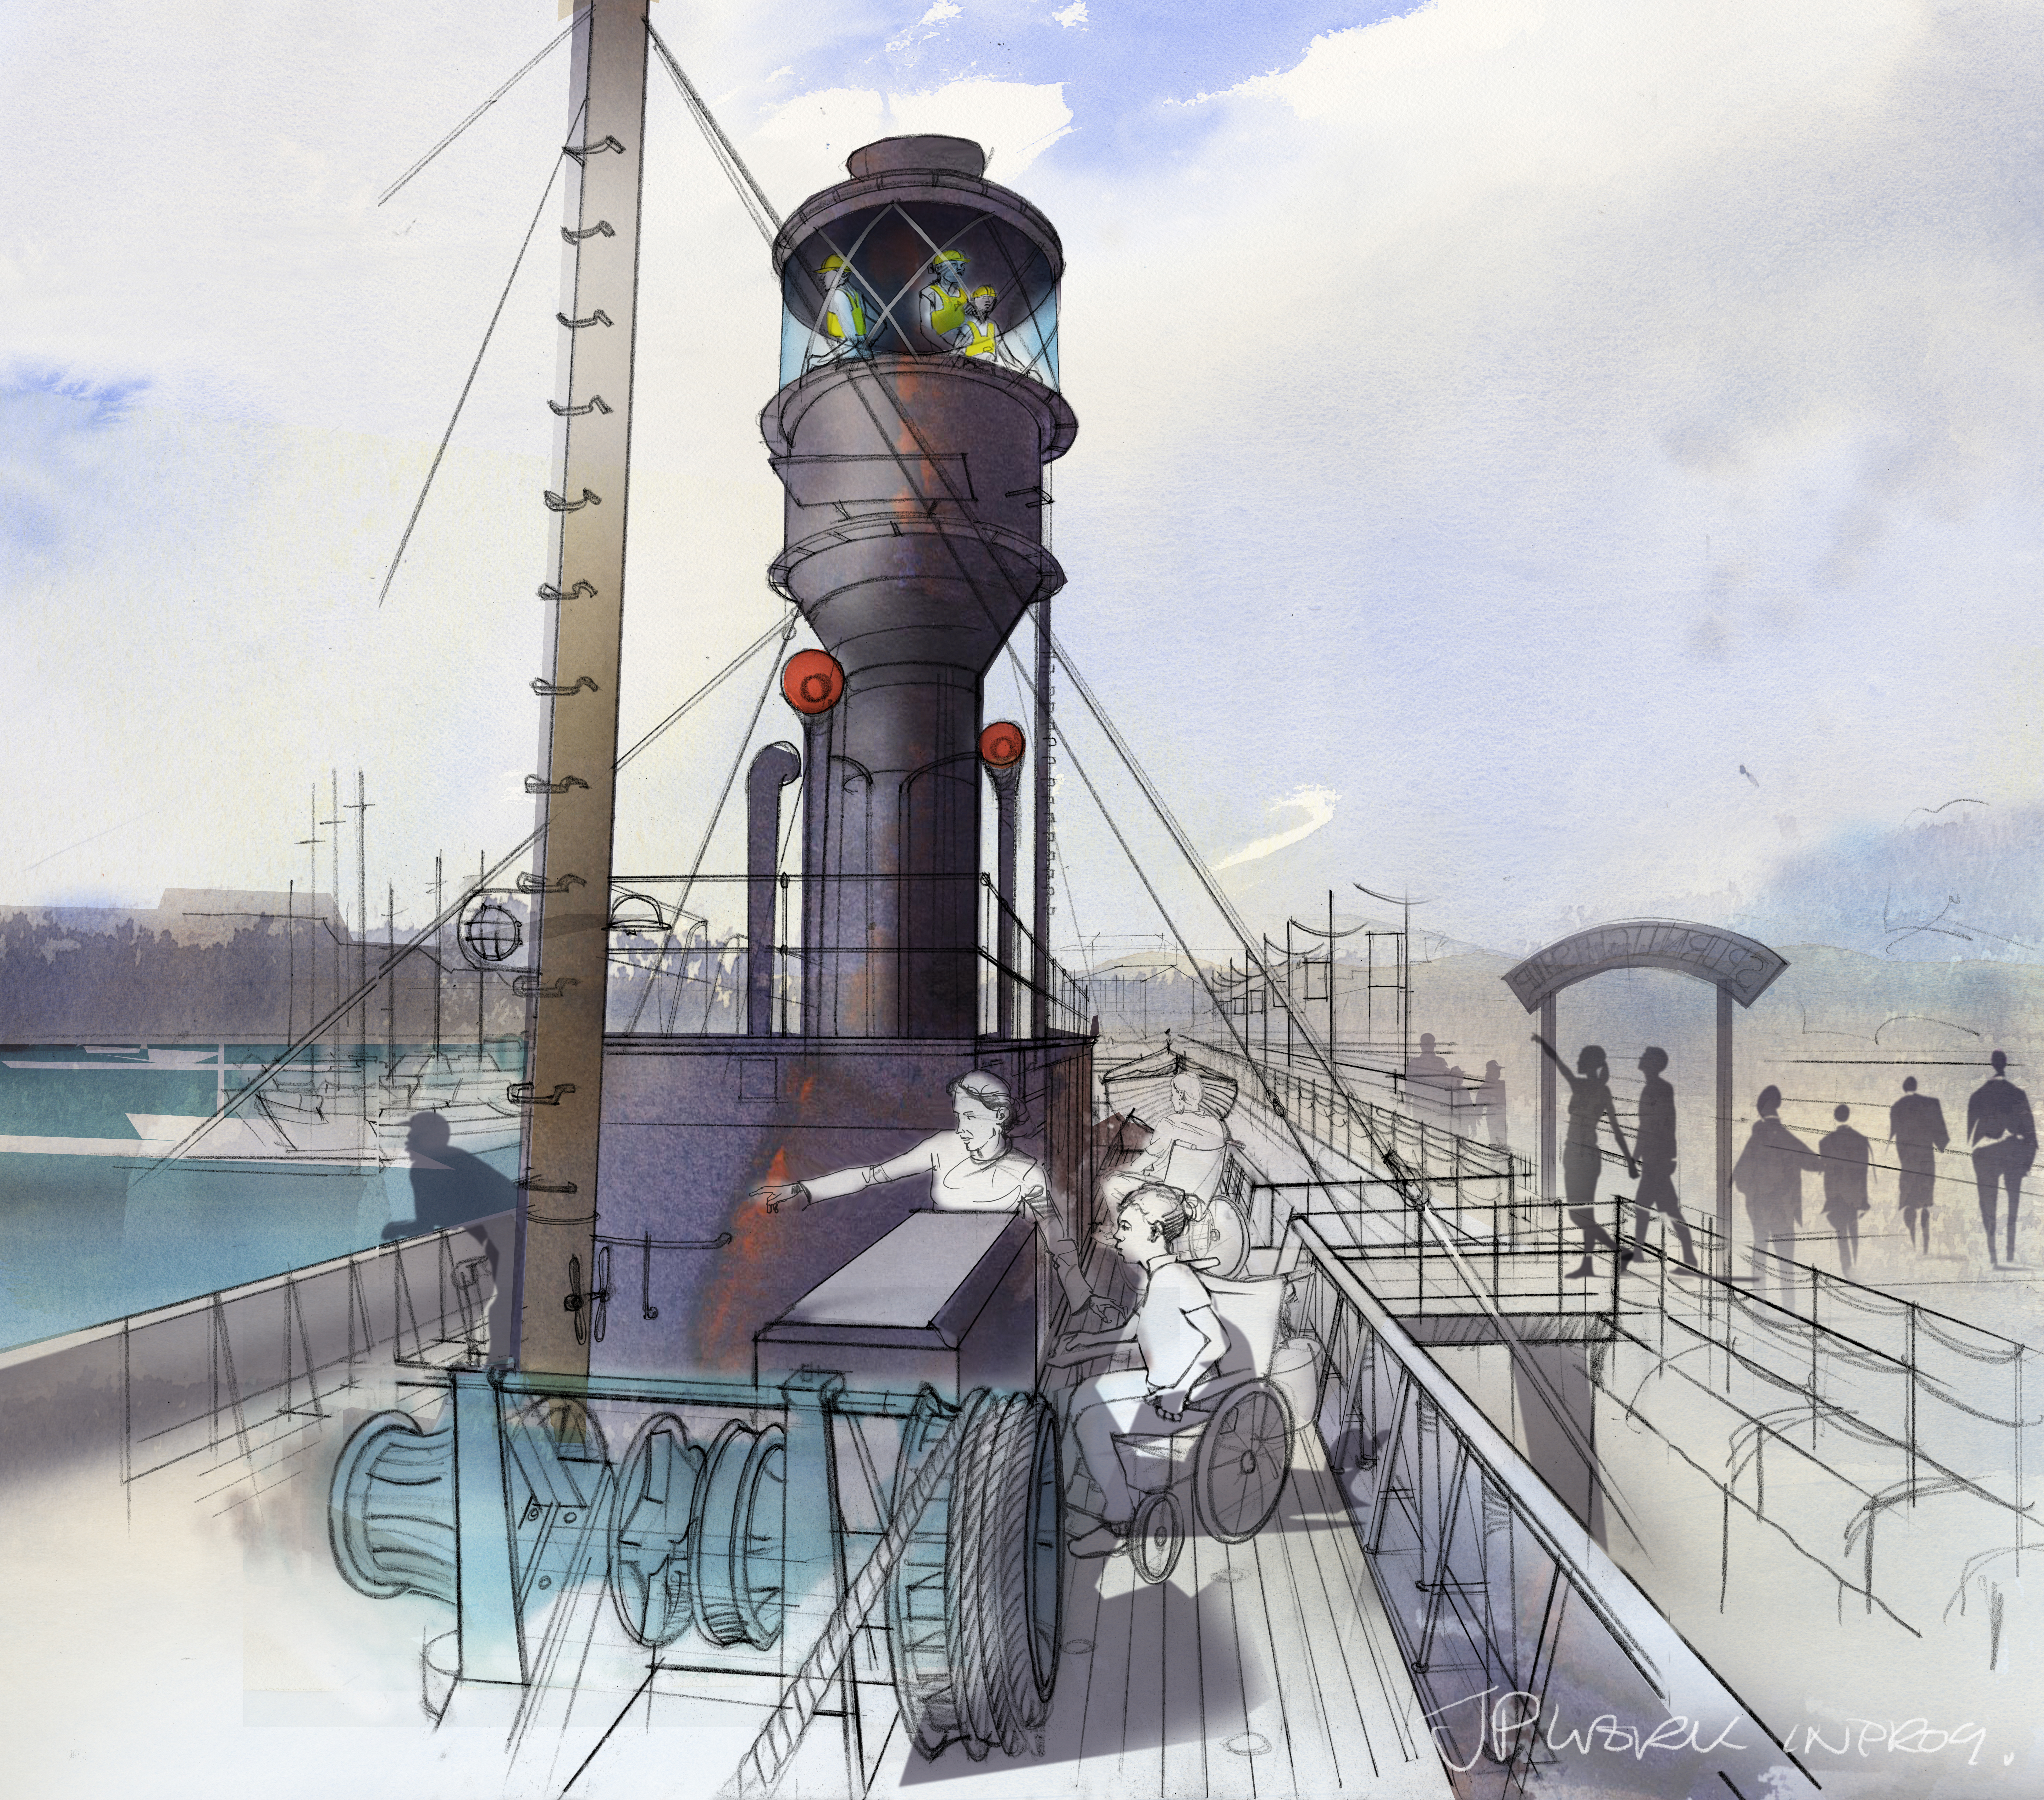 The Hull: Yorkshire Maritime City plans include better access to the historic Spurn Lightship.